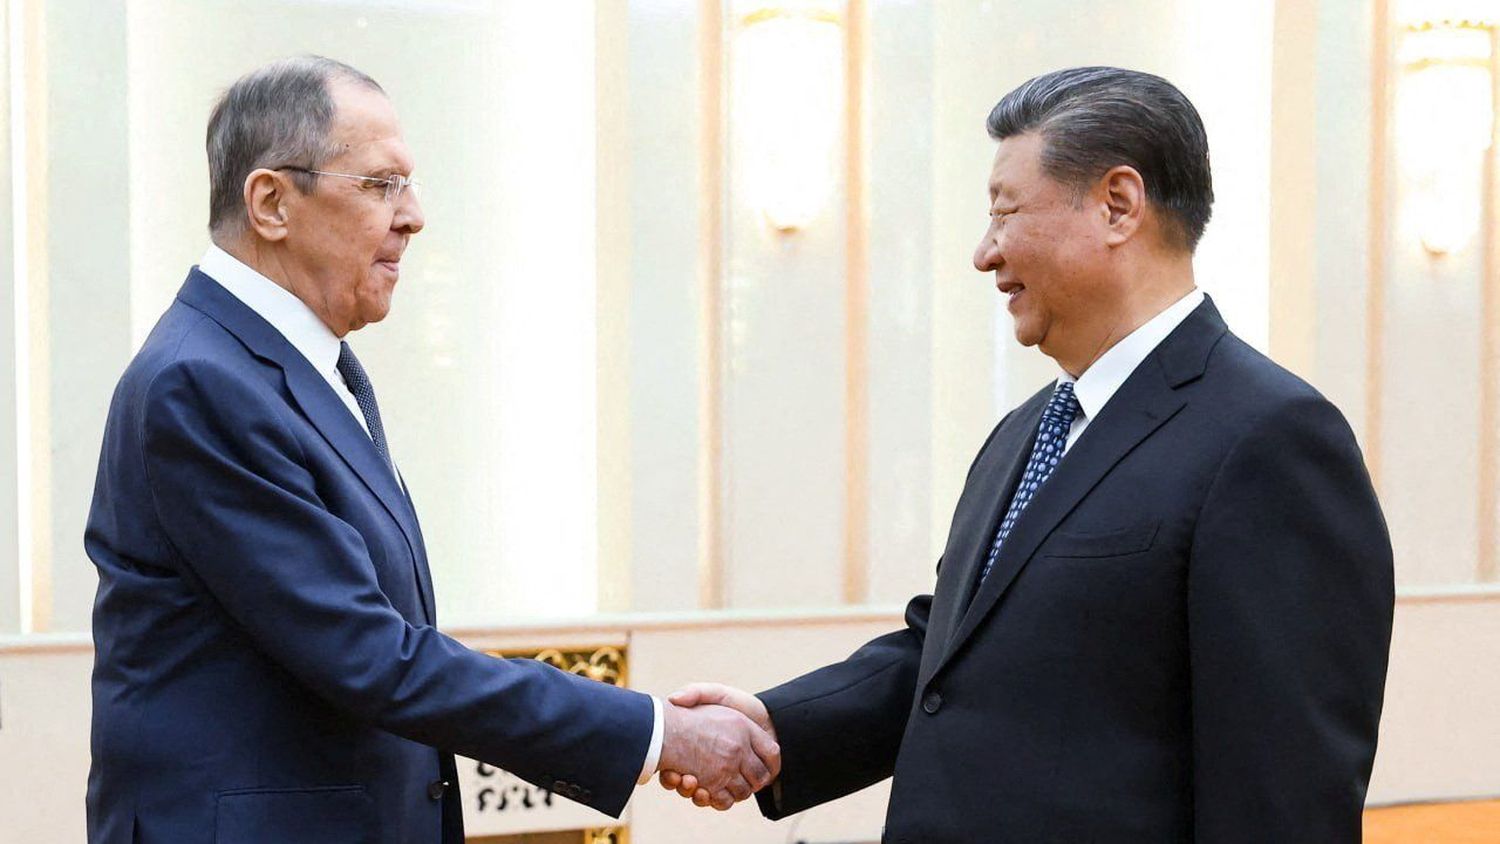 Russia Foreign Minister with Chinese leader Xi Jinping in Beijing